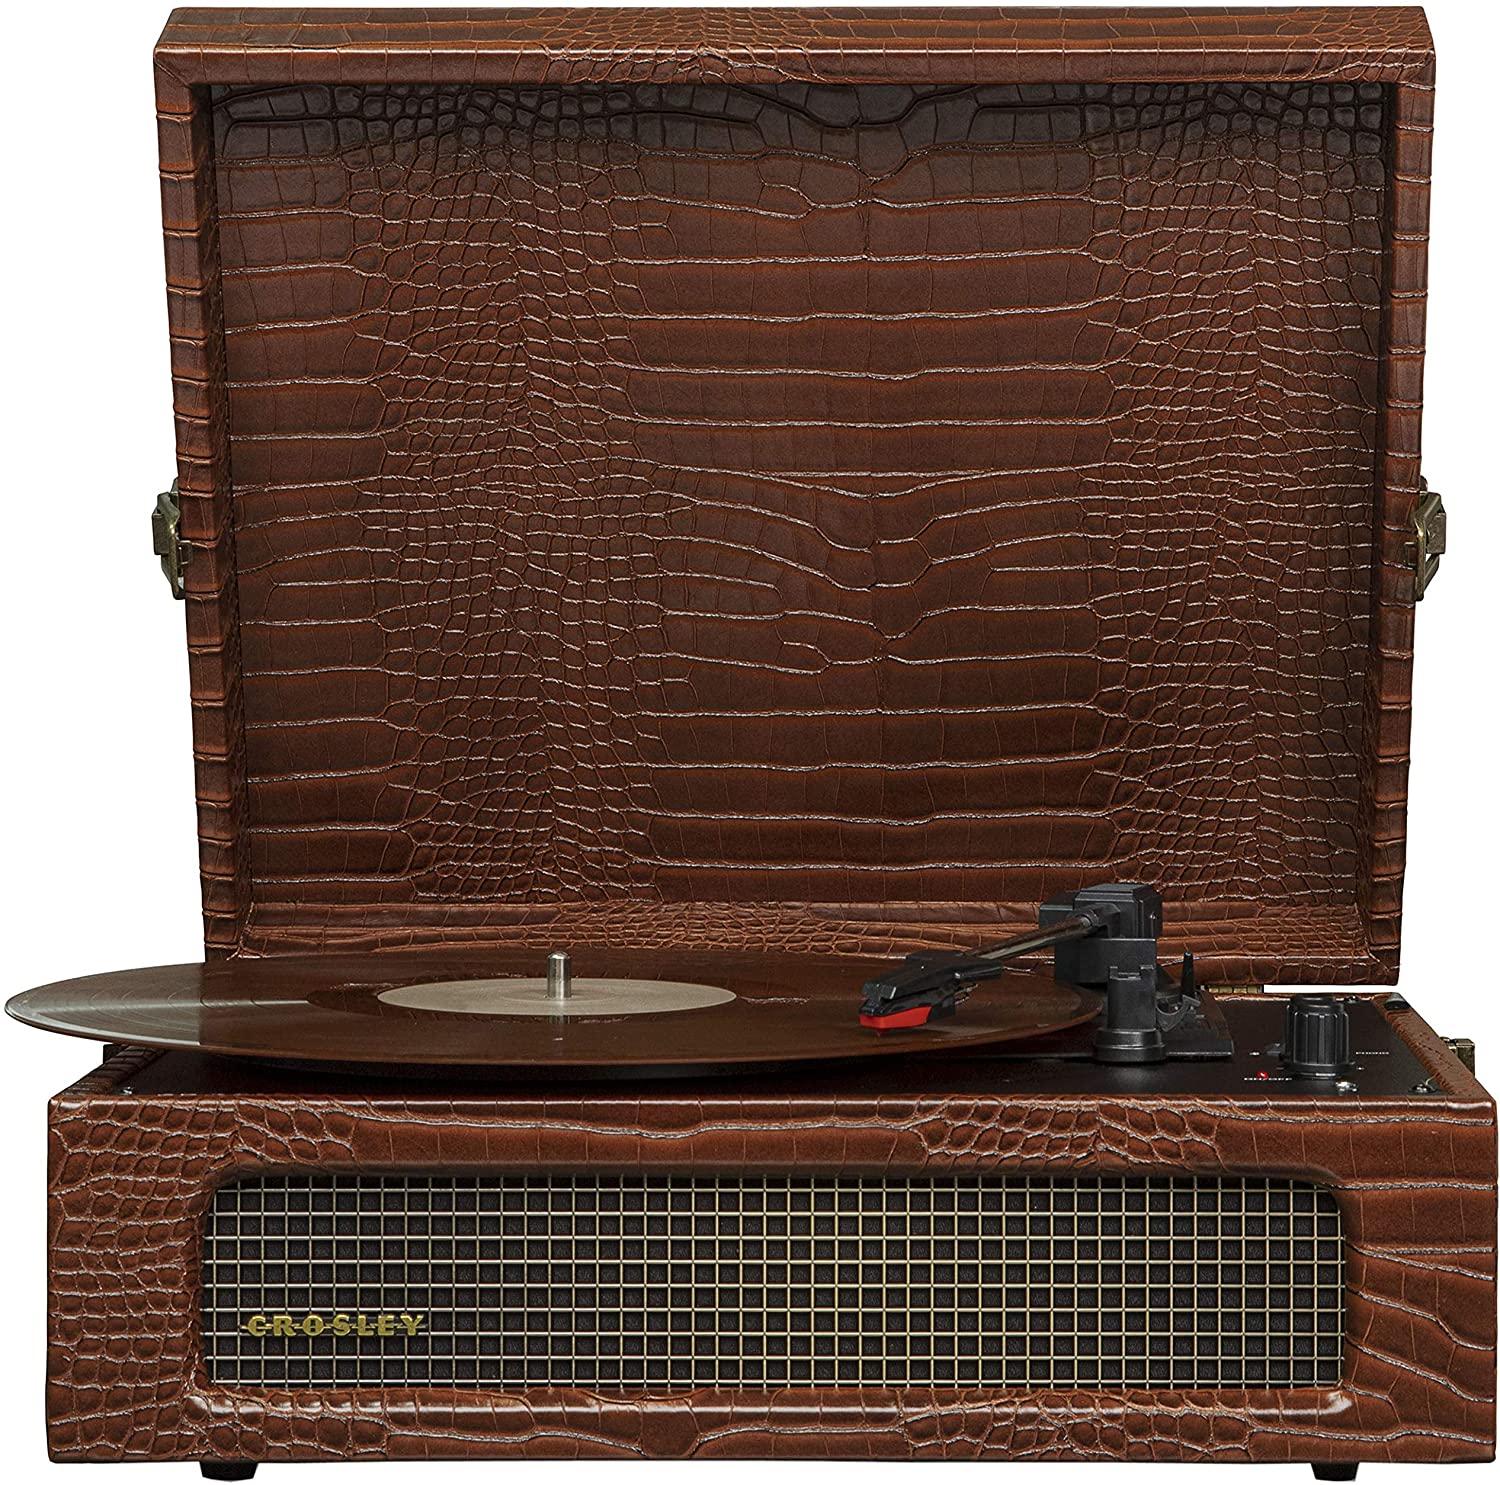 Crosley Voyager Vintage Portable Bluetooth Turntable with Built-in Speakers